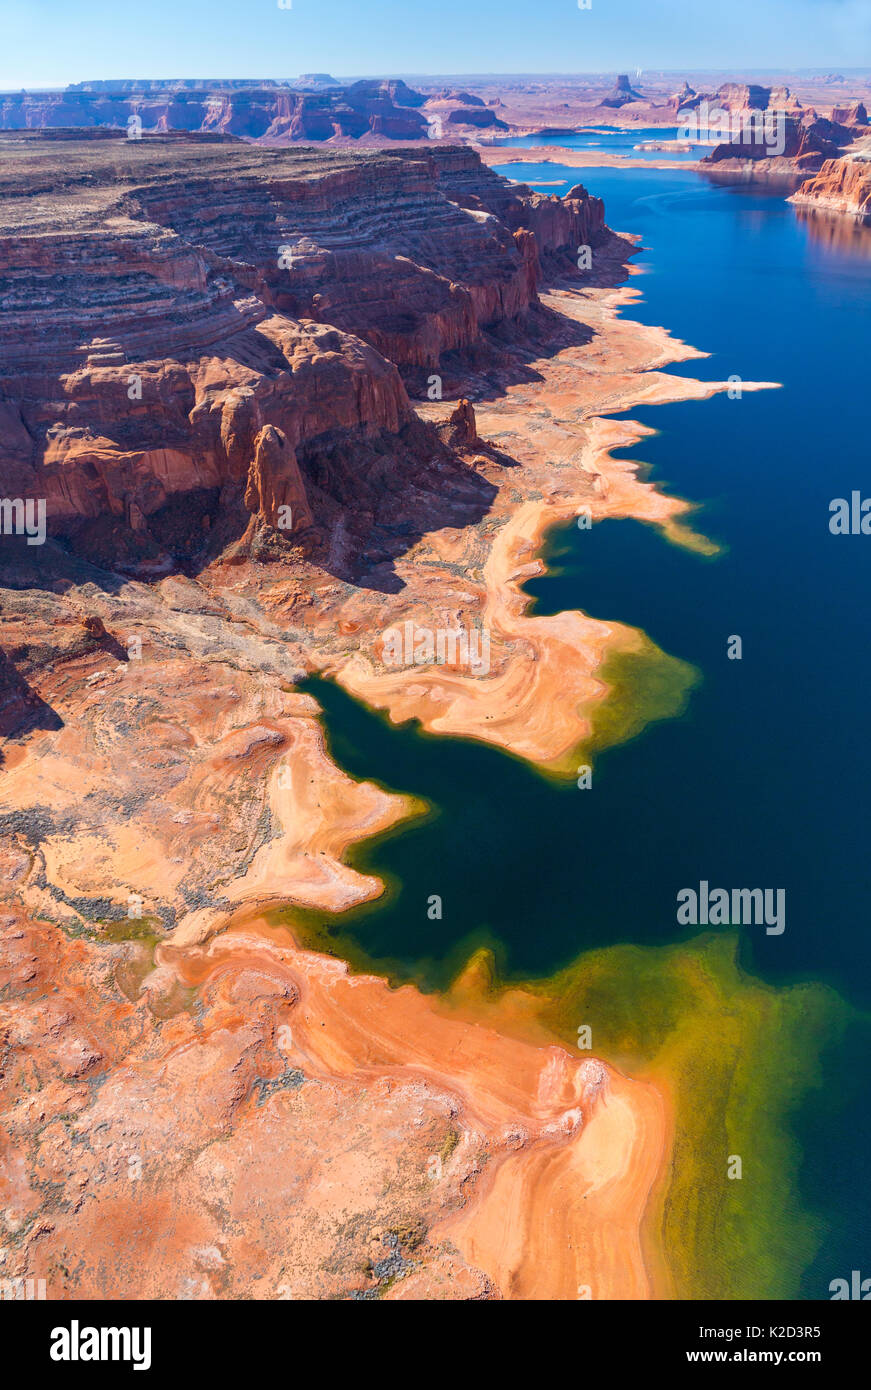 Aerial view of Lake Powell, near Page, Arizona and the Utah border, USA, February 2015. Lake Powell is a reservoir on the Colorado River, and is the second largest man made lake in the USA. Stock Photo